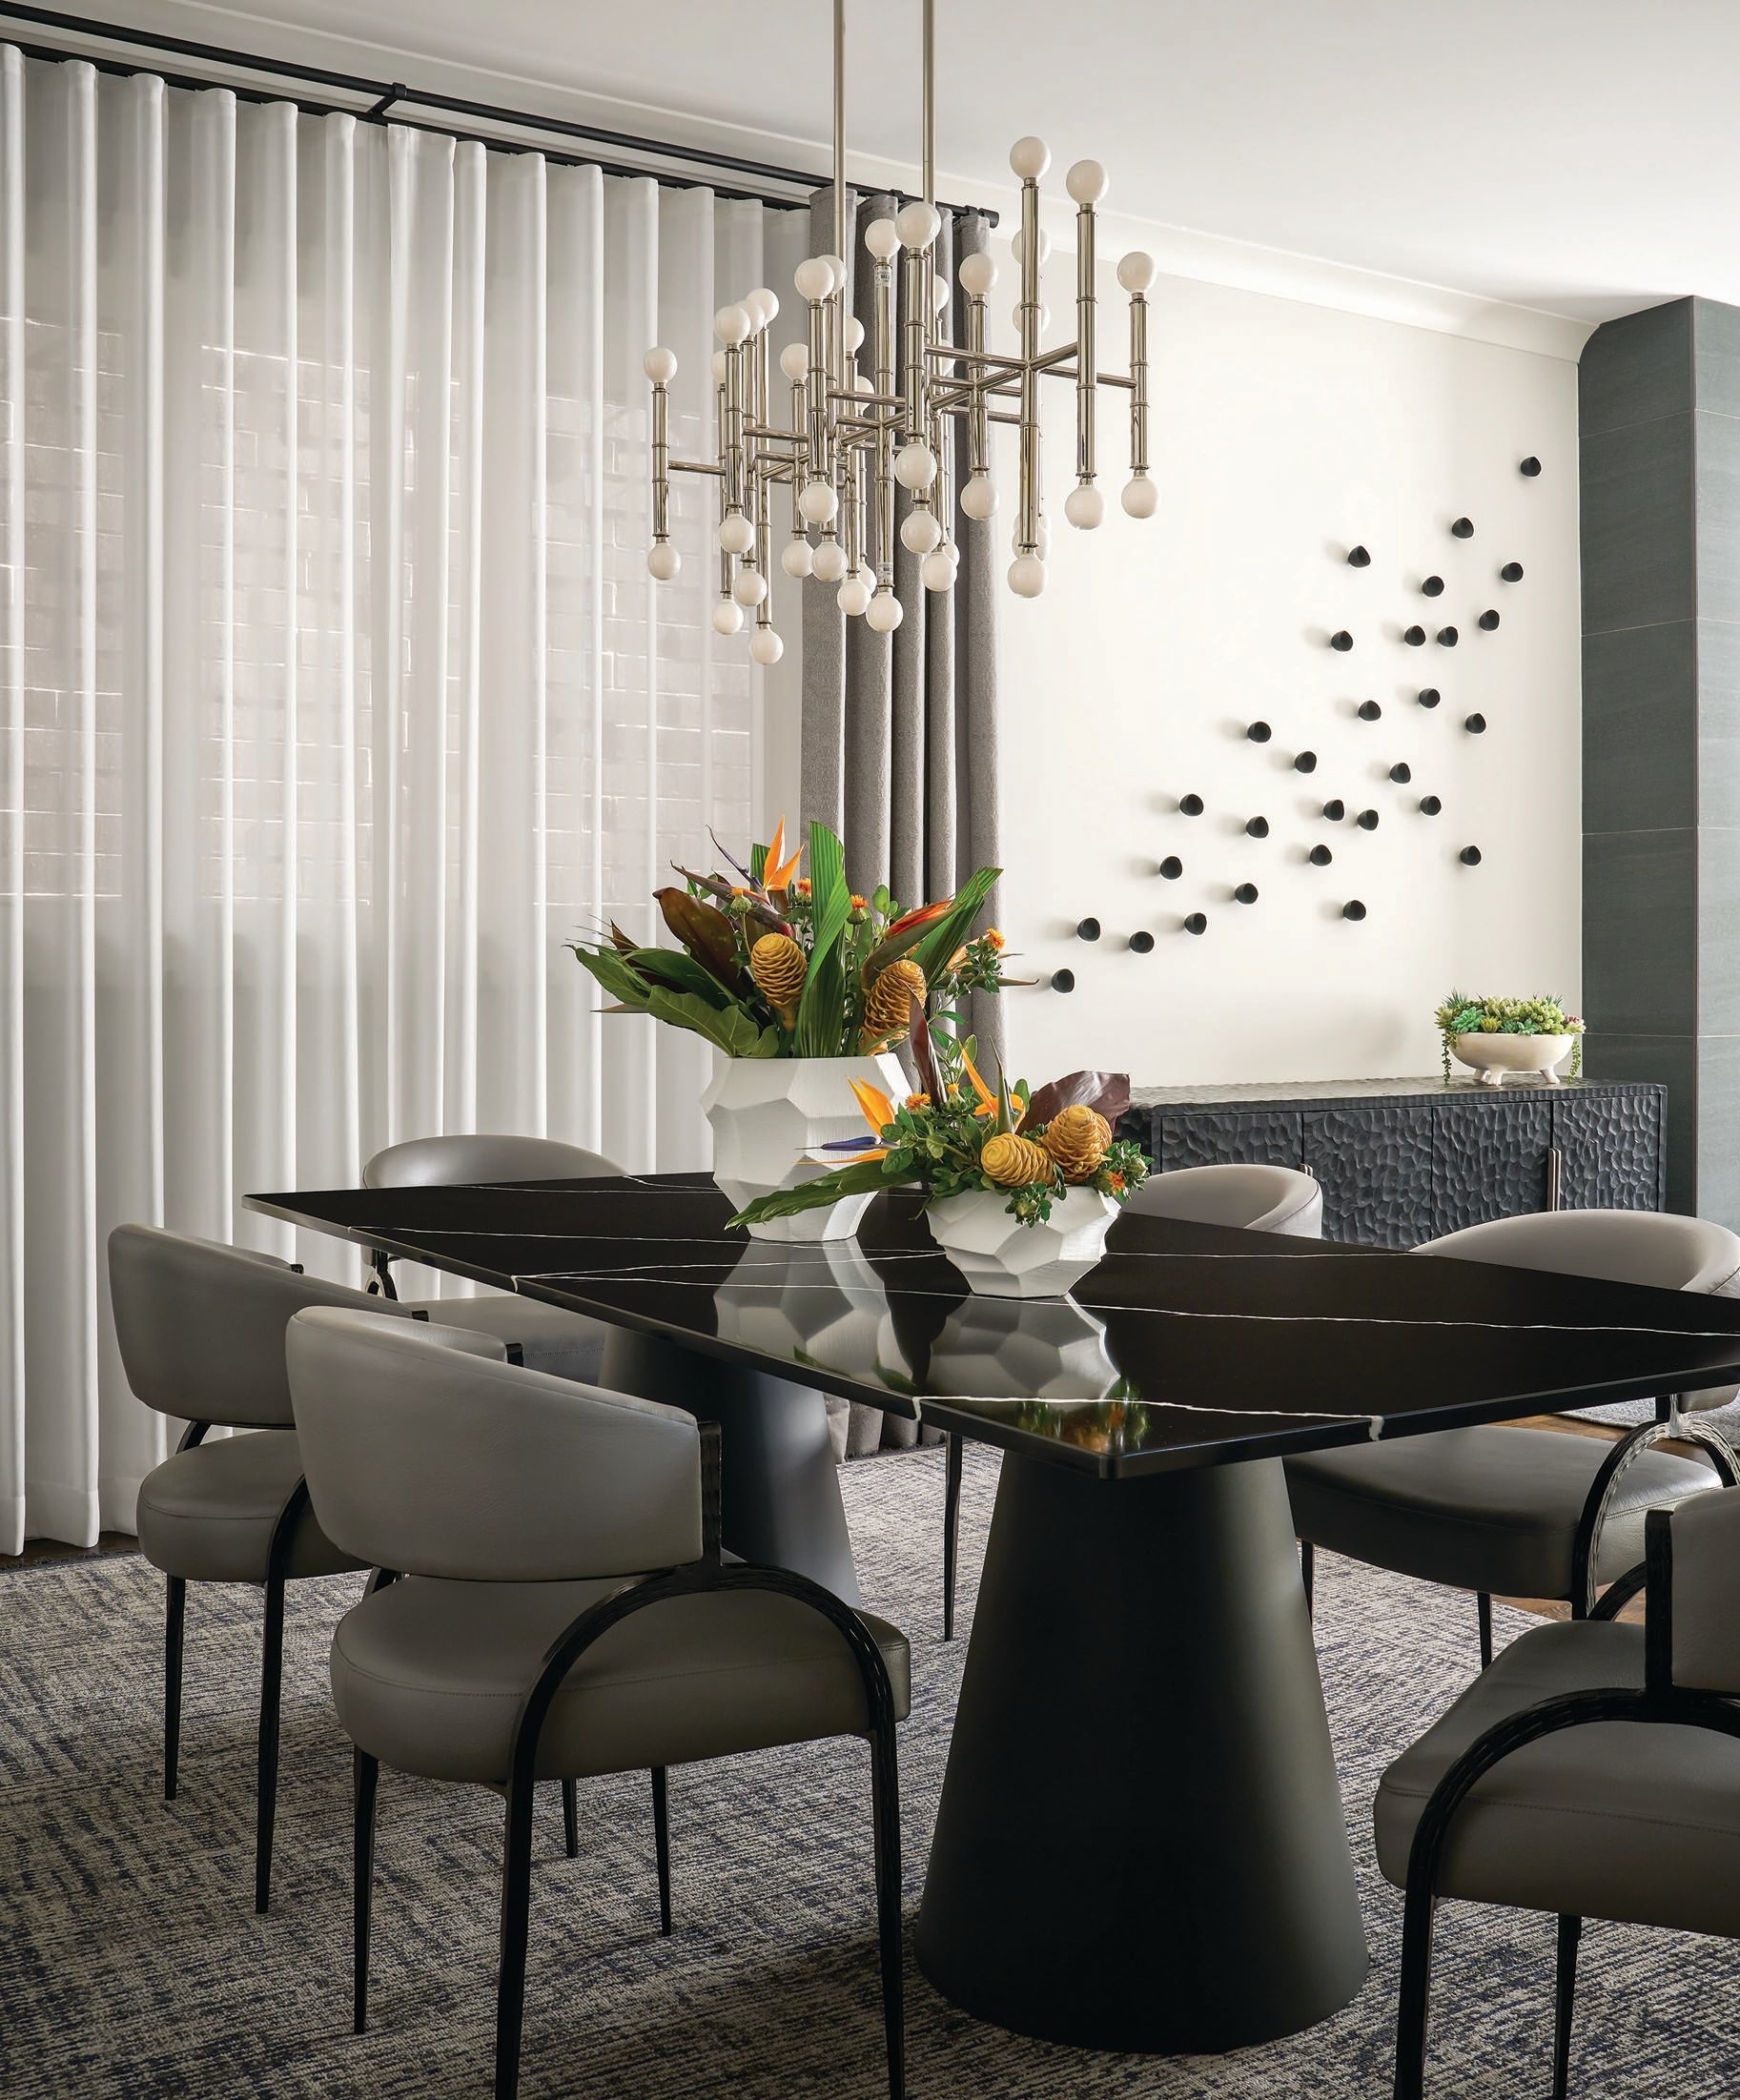 A Meurice chandelier by Jonathan Adler, Arteriors chairs and a polished Vicostone Nero Marquina dining table with custom base fabricated by Tithof Tile & Marble star in the dining room. PHOTOGRAPHED BY RYAN MCDONALD